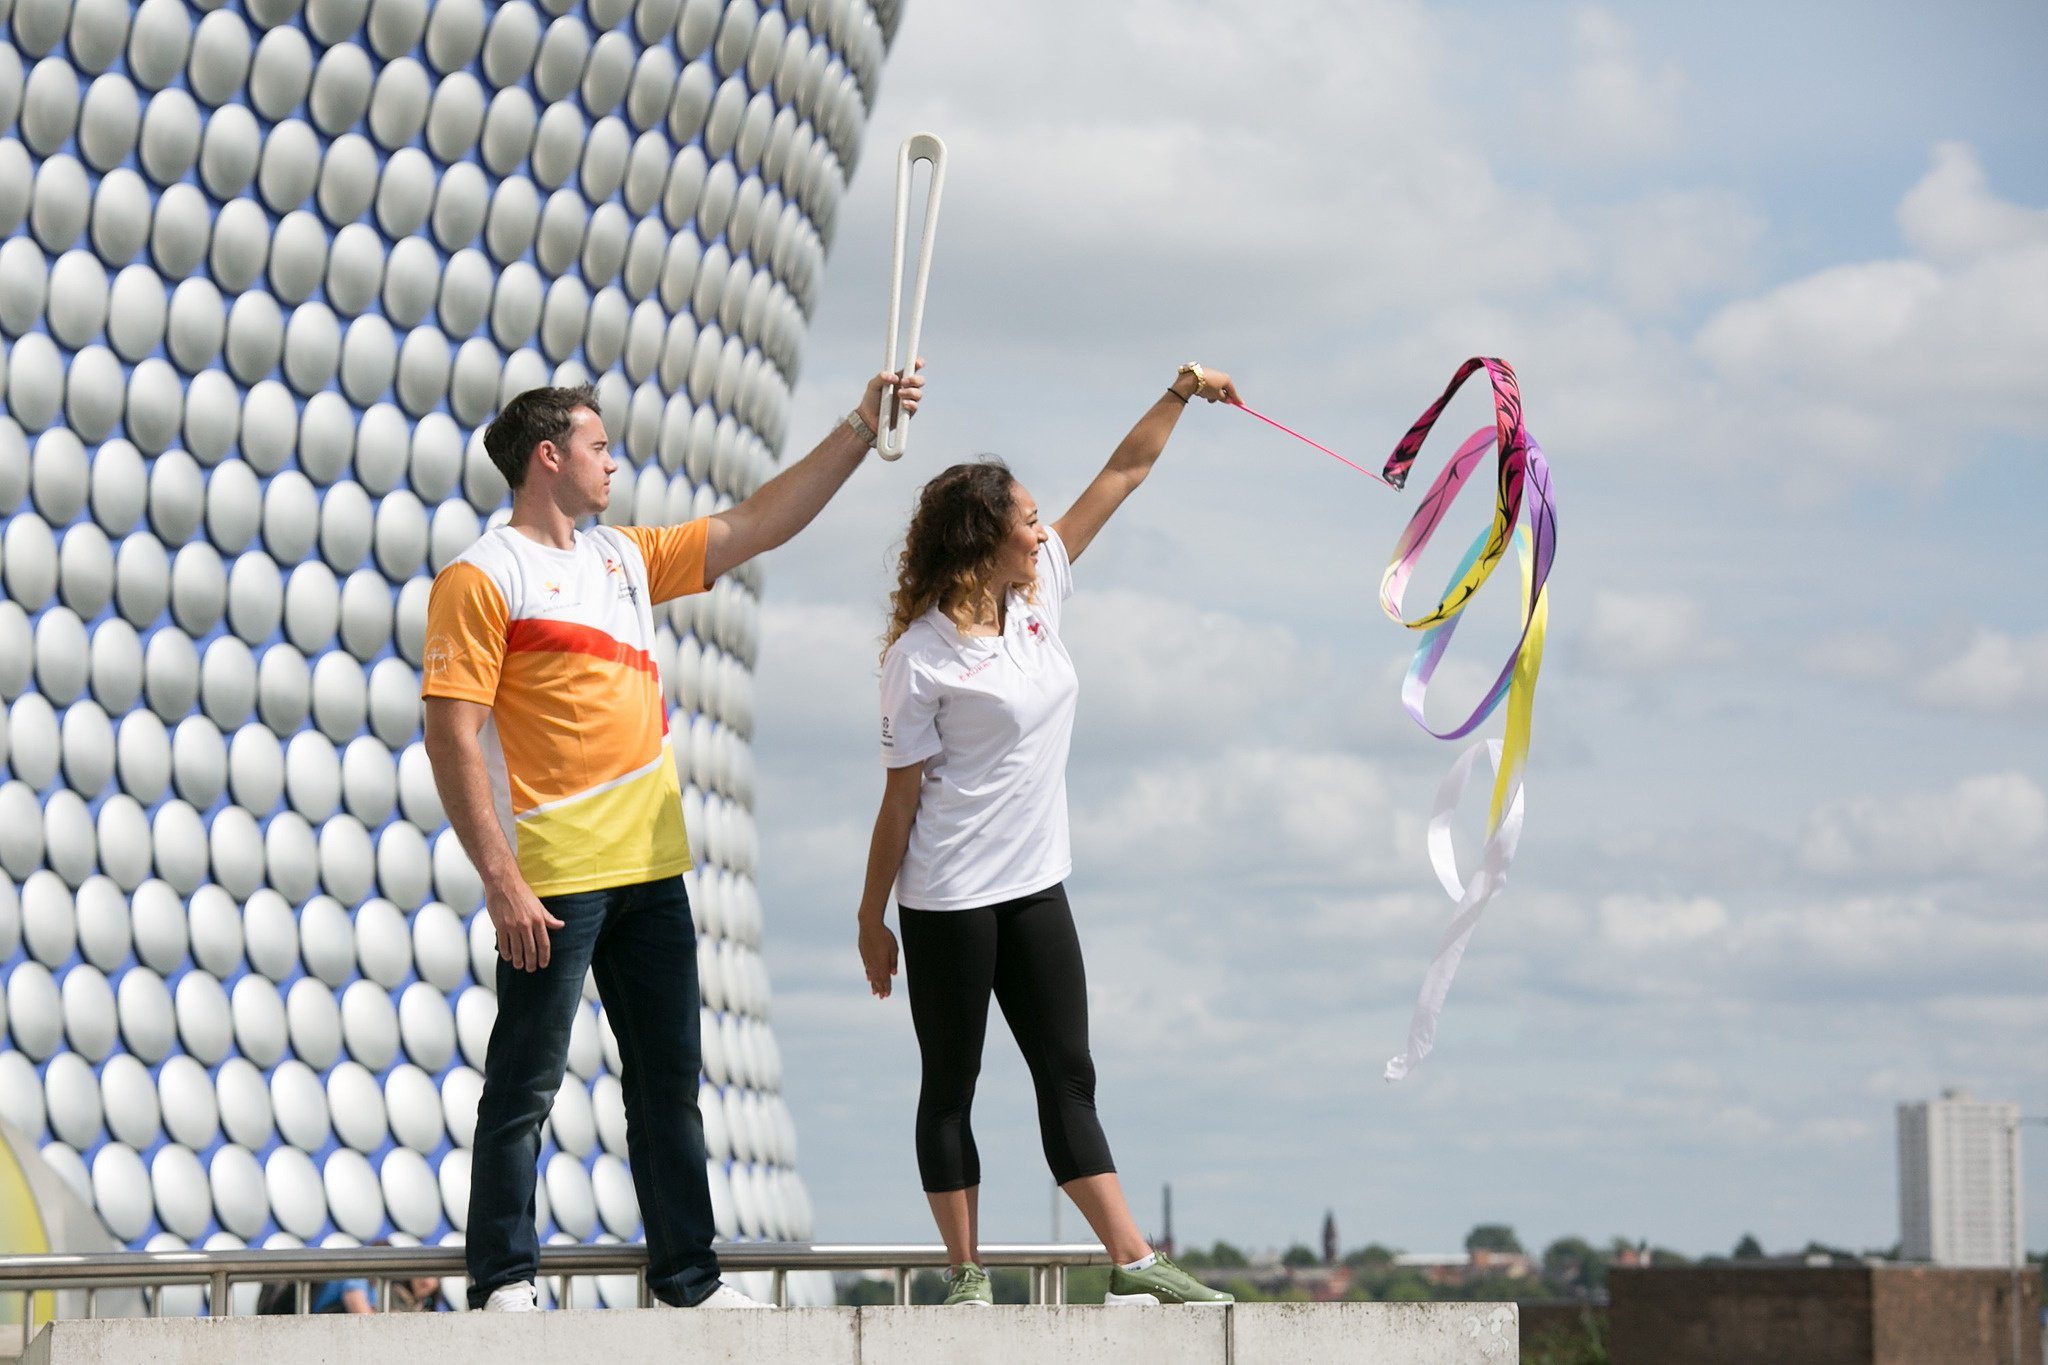 Birmingham will host the 2022 Commonwealth Games and hopes that the event will bring economic benefits ©Birmingham 2022/Twitter